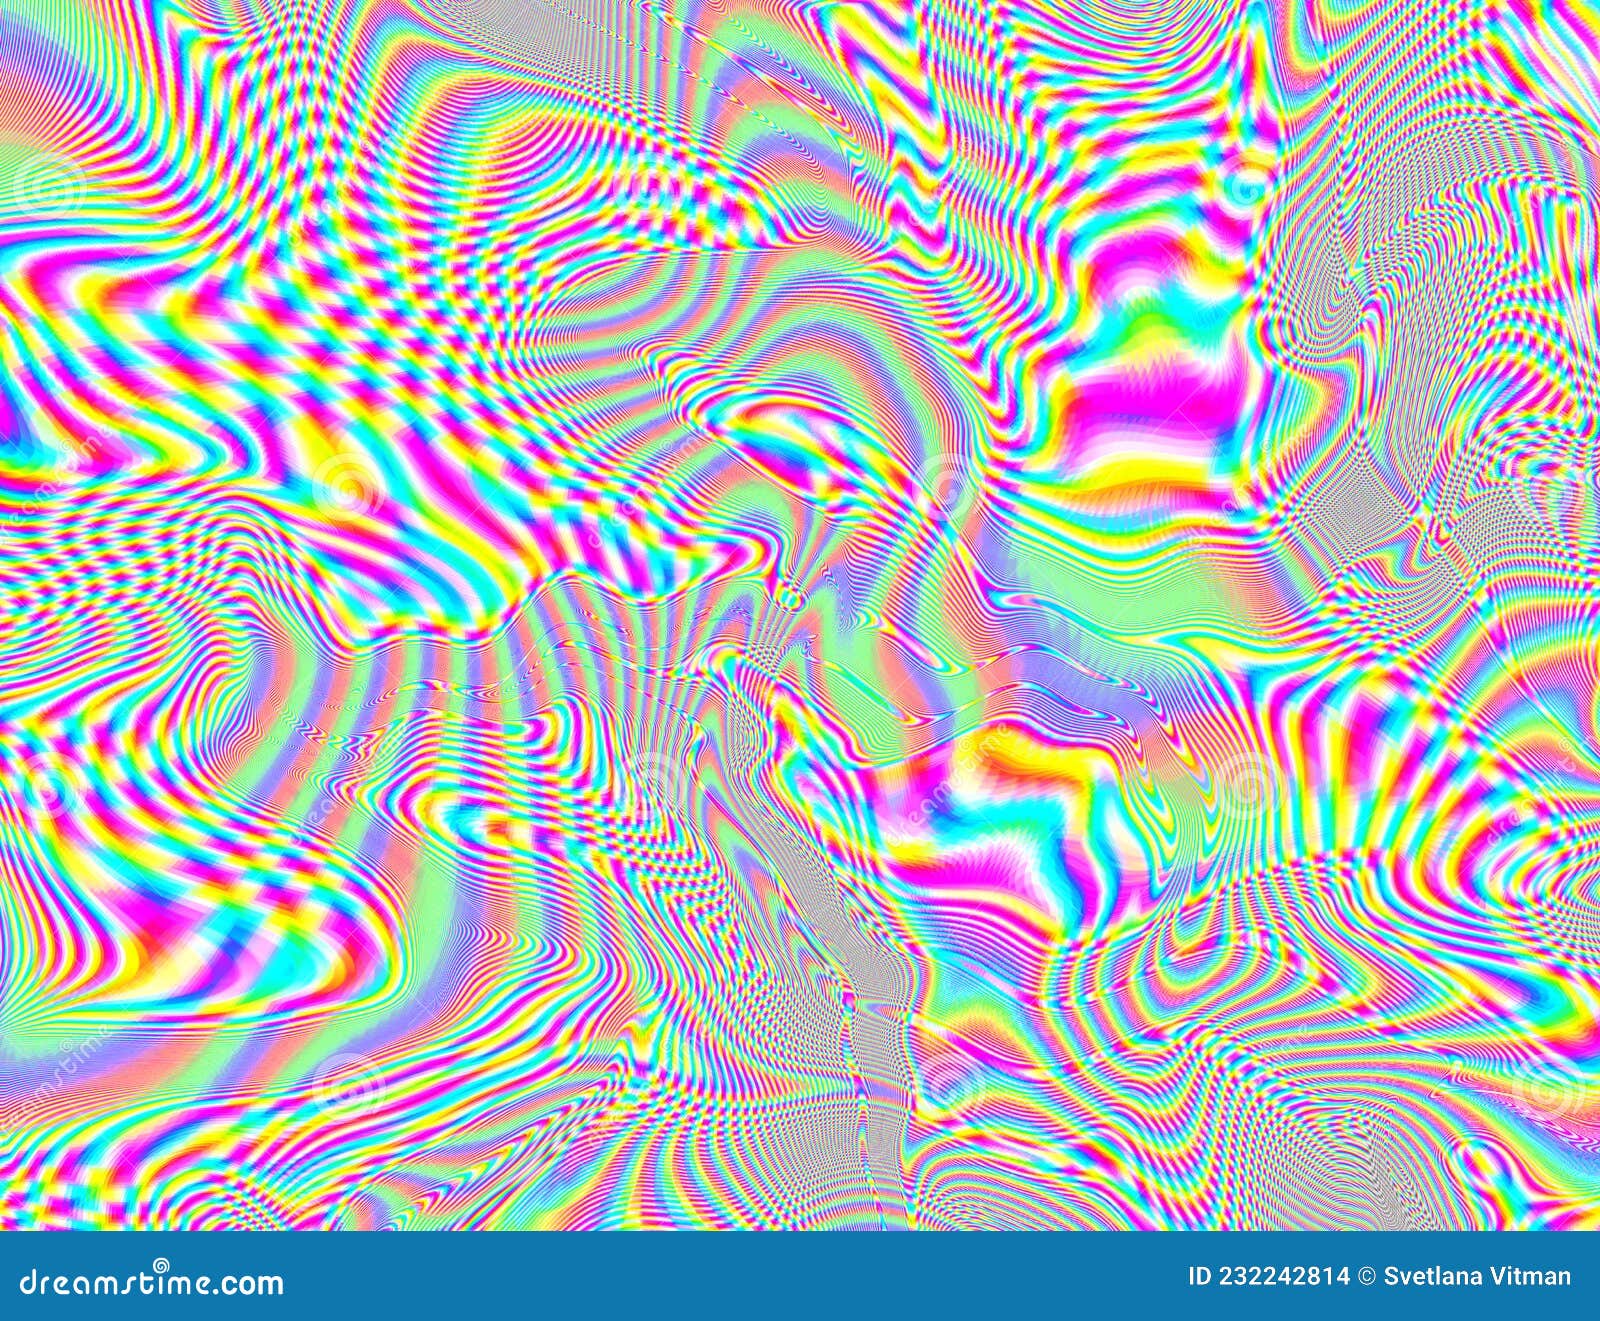 Trippy Psychedelic Rainbow Background Glitch LSD Colorful Wallpaper. 60s  Abstract Hypnotic Illusion Stock Illustration - Illustration of pattern,  background: 232242814